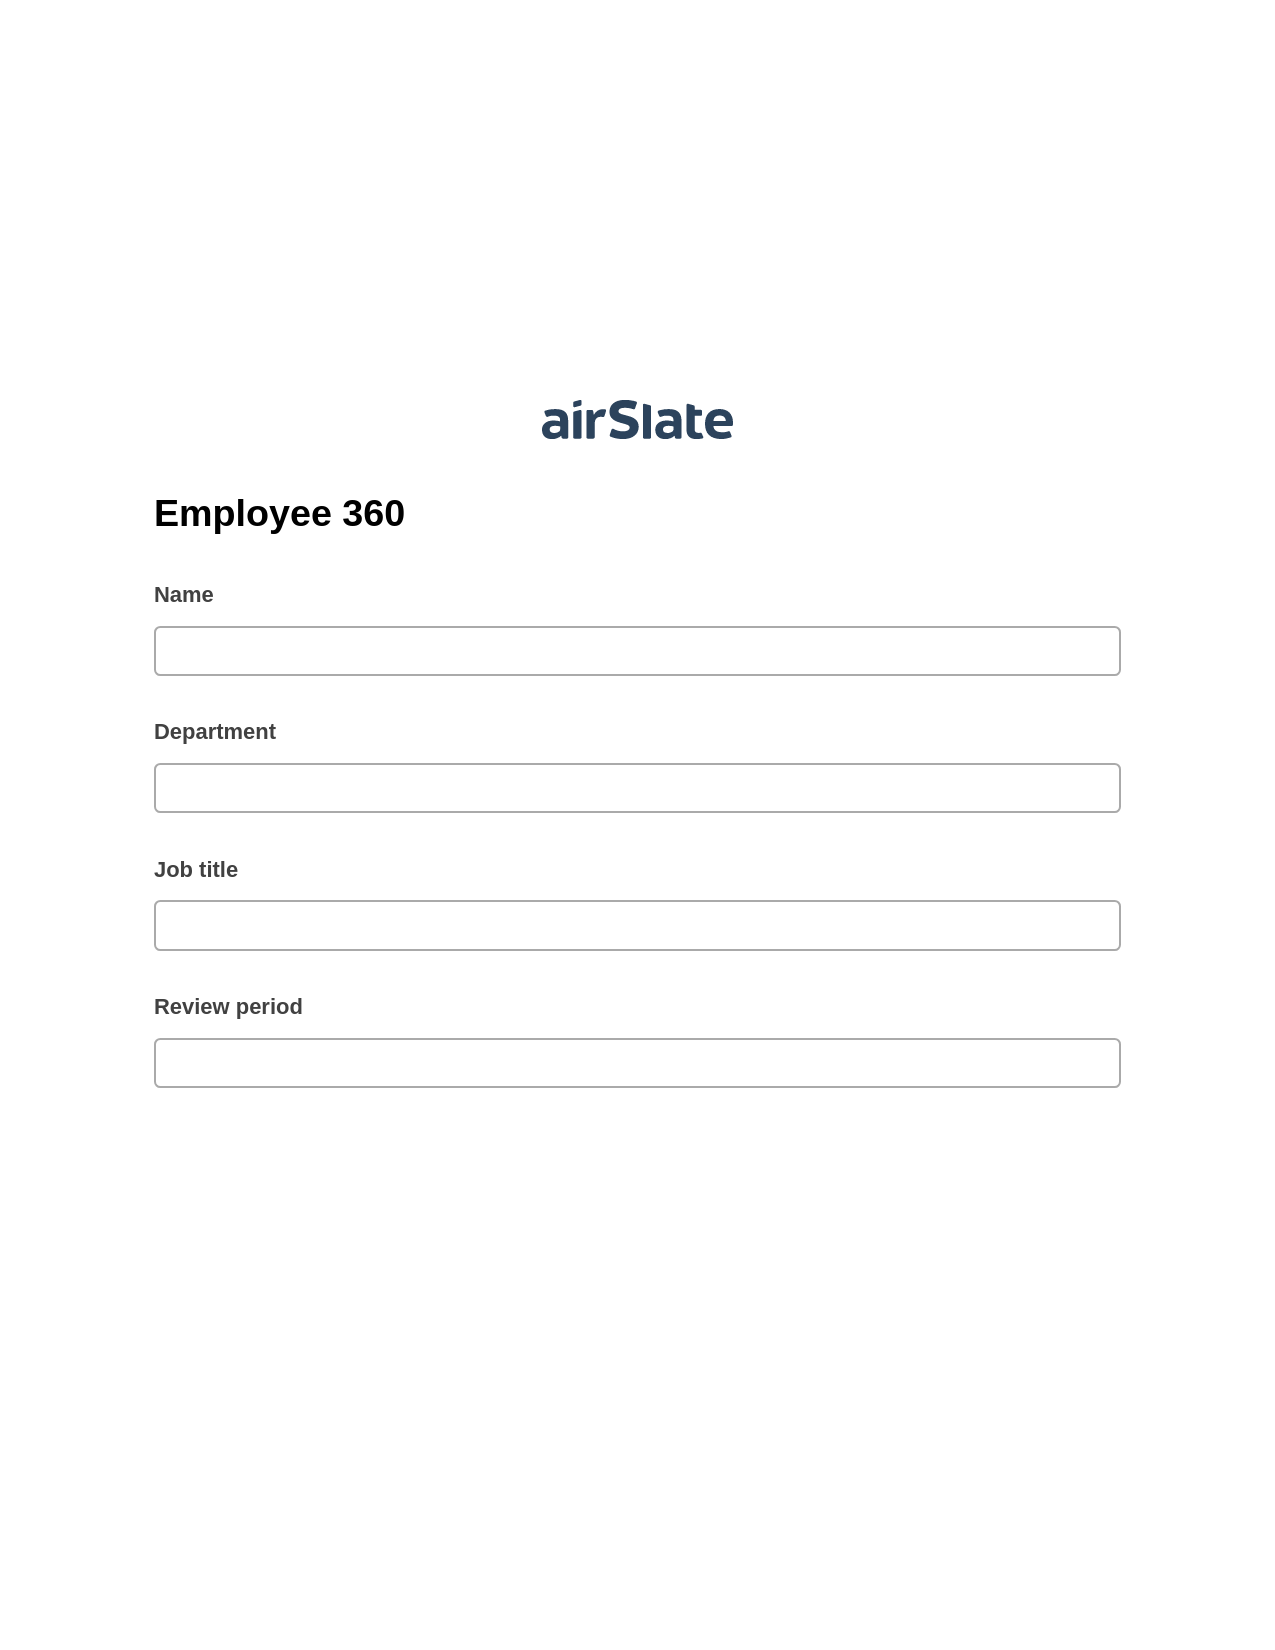 Employee 360 Pre-fill from MS Dynamics 365 Records, Google Cloud Print Bot, Archive to Dropbox Bot